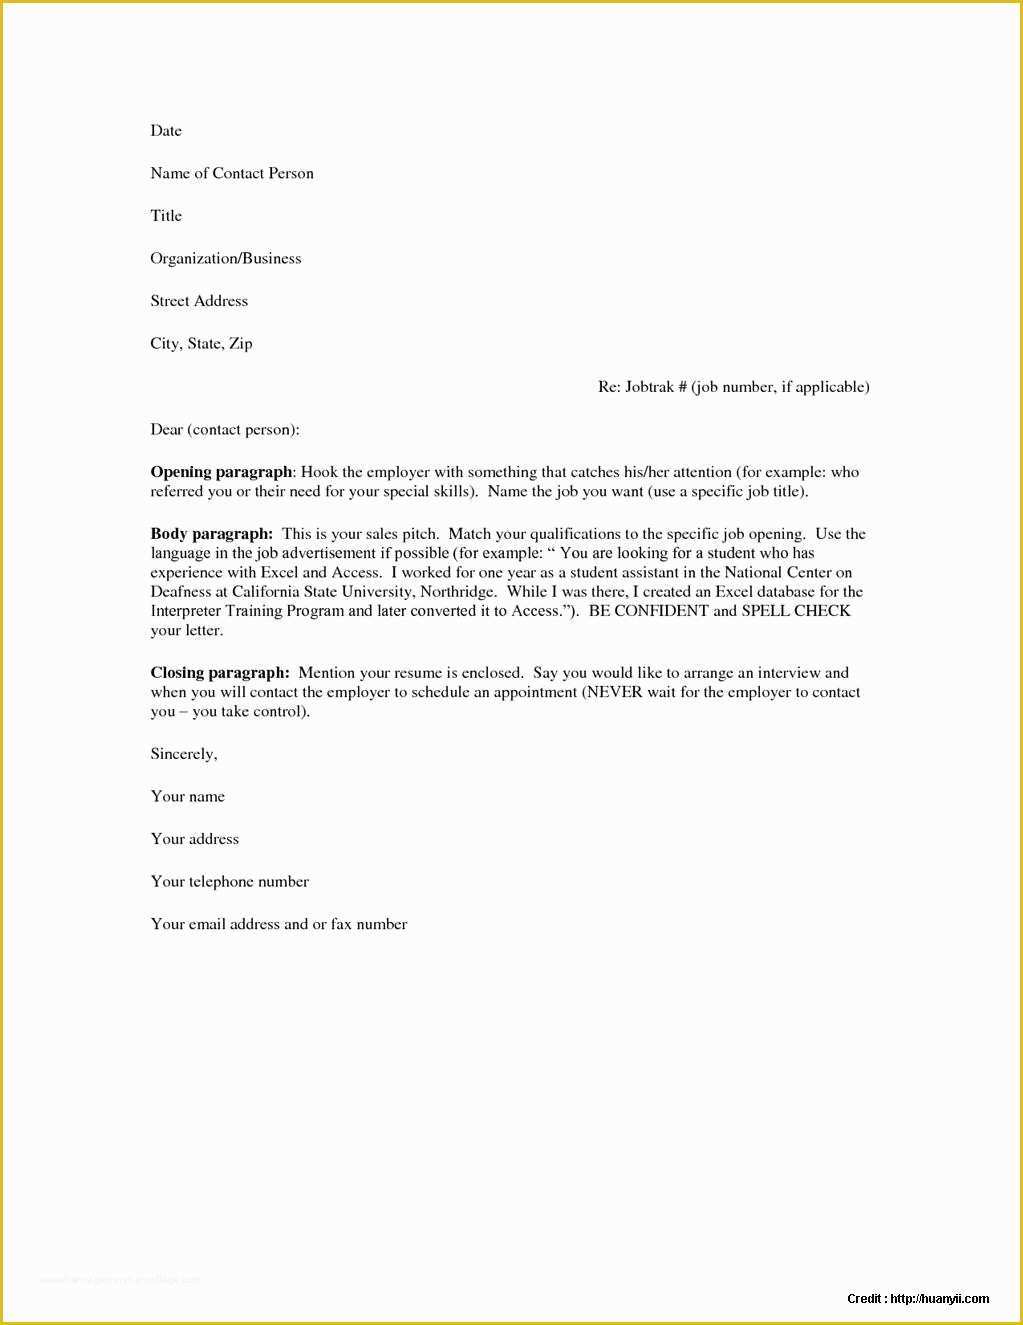 Free Resume Cover Letter Template Download Of Resume Cover Letter Samples Free Download Resume